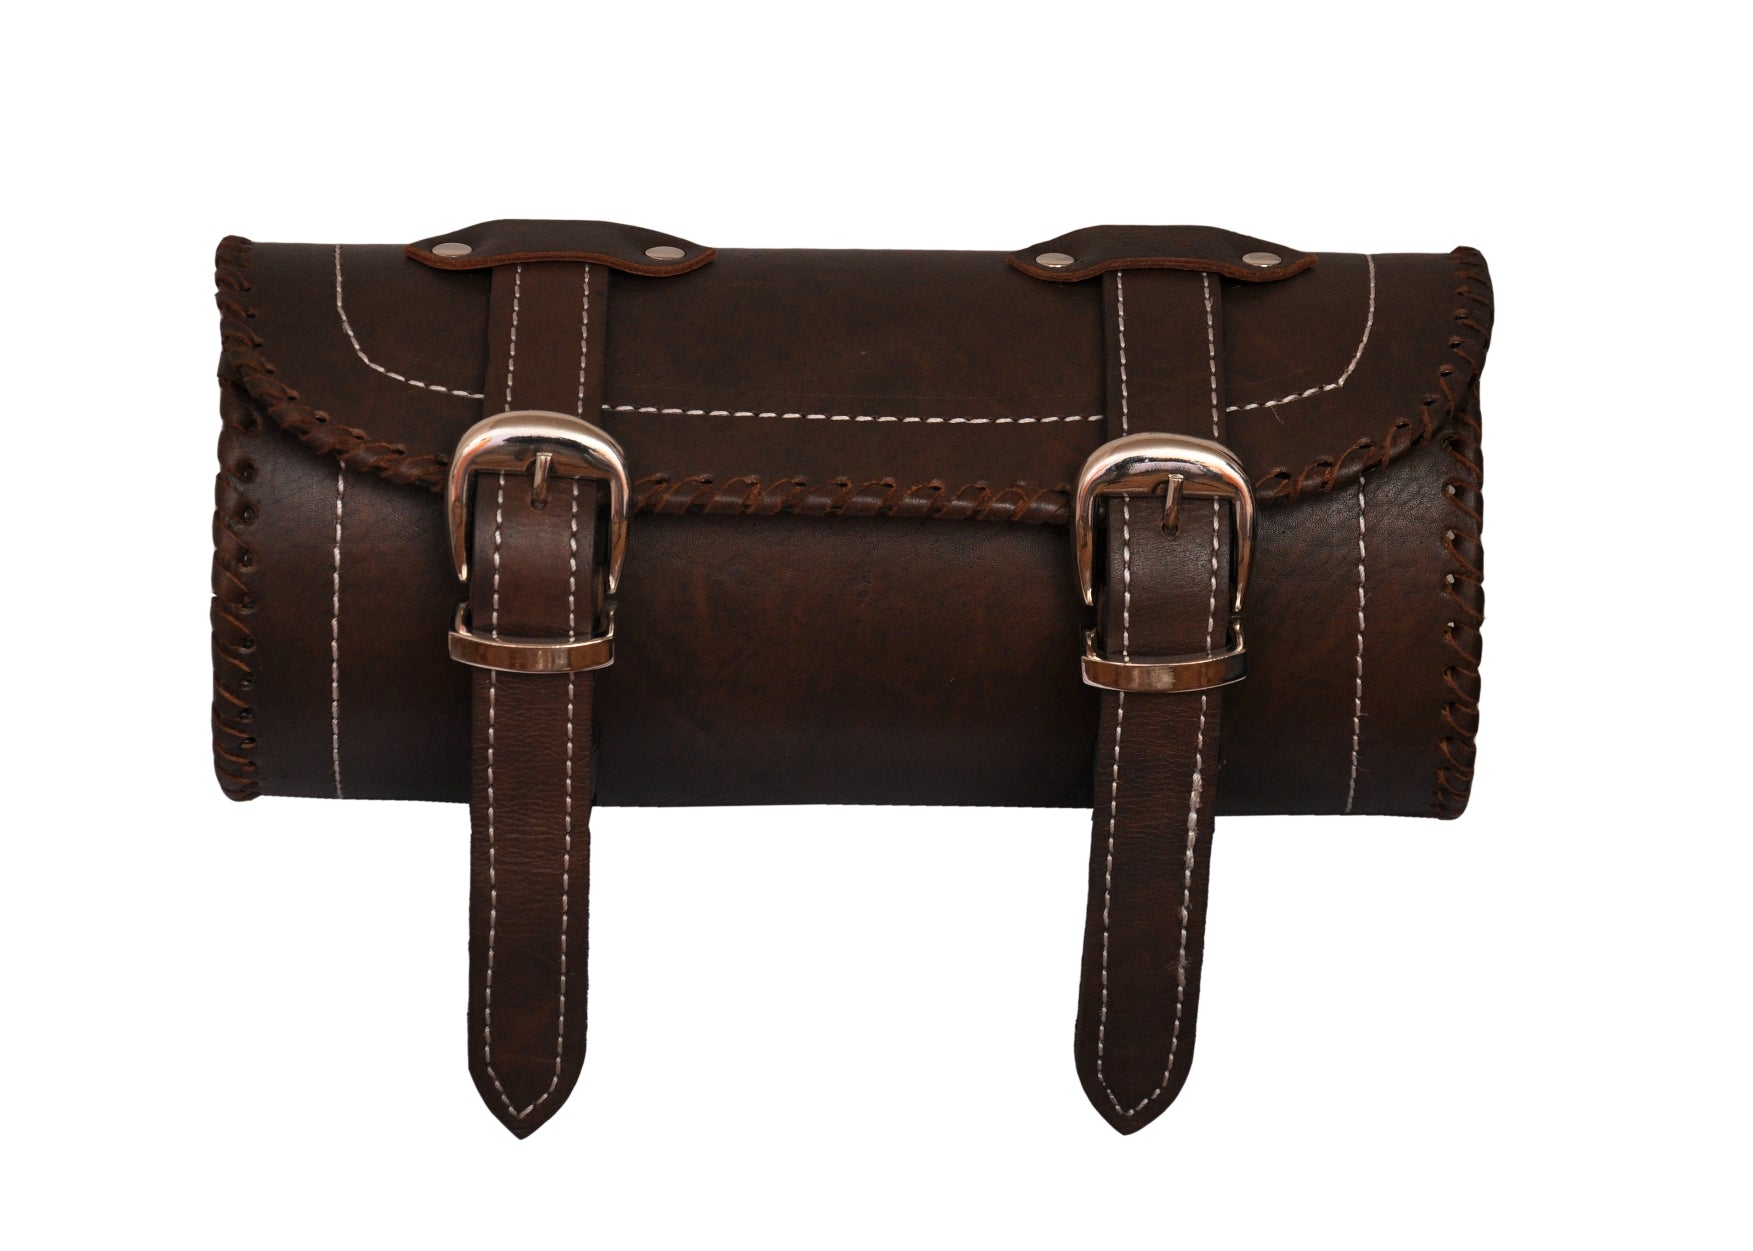 Amazon.com: The Leather Artistry Genuine Leather Vintage Motorcycle 2 Strap  Buckle Closure Tool Bag Brown Handlebar Sissy Bar Tool Pouch Roll Bags -10  : Automotive